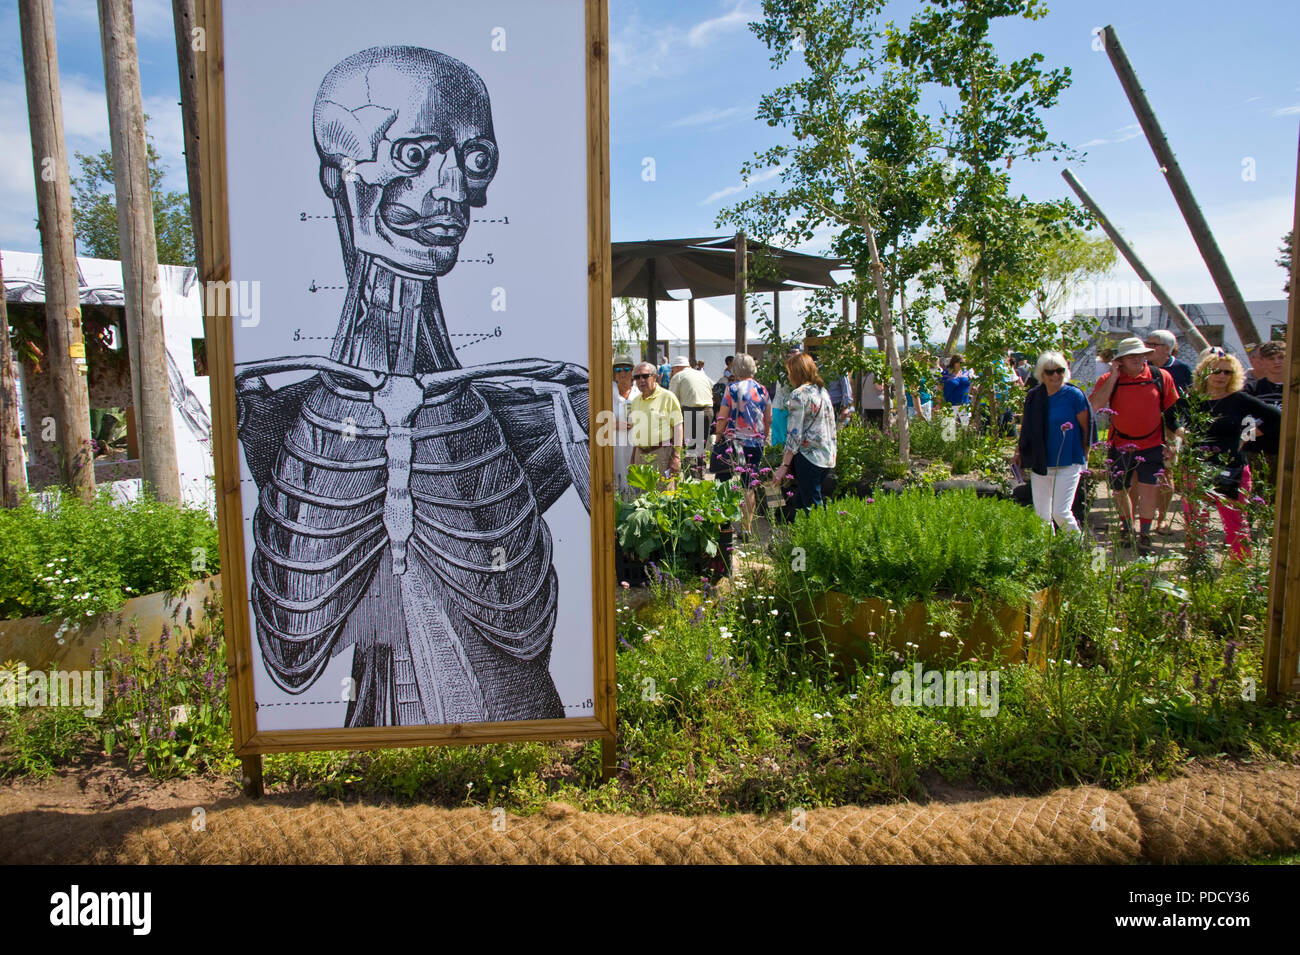 The Poisonous Garden at RHS Tatton Park flower show Cheshire England UK Stock Photo